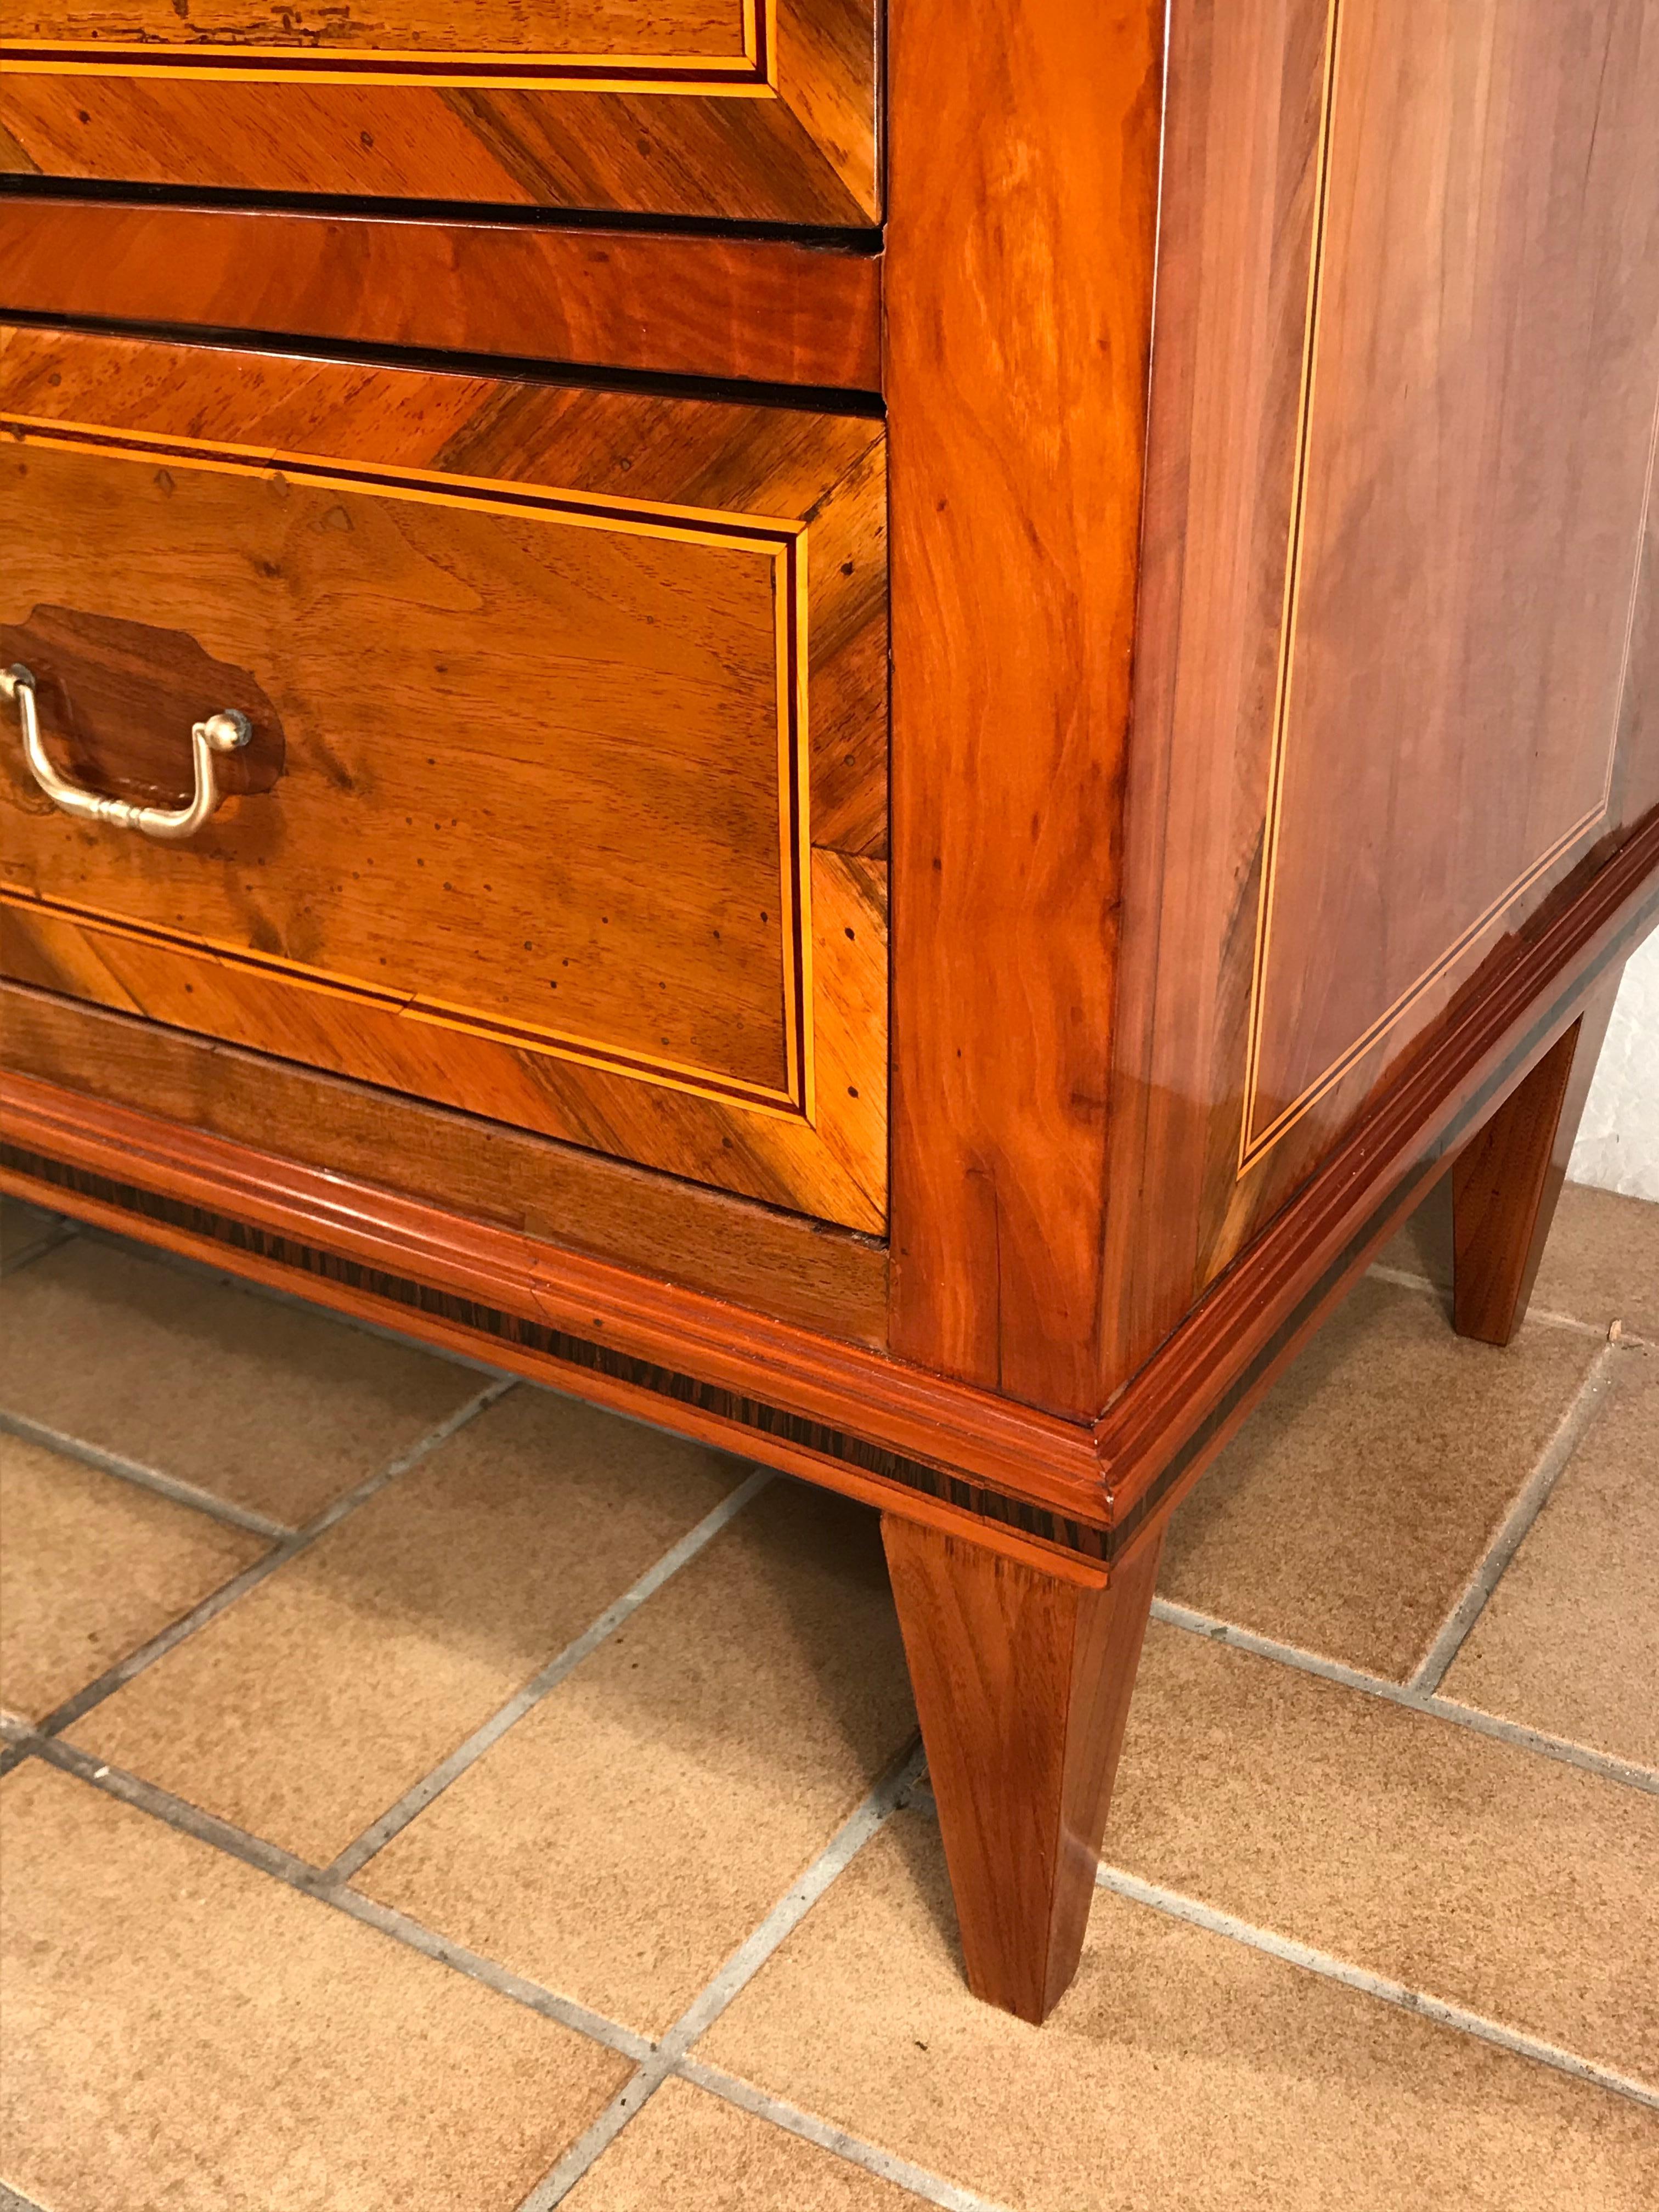 Louis XVI Dresser, South German 1780.
This original 18th century Louis XVI dresser has three drawers and stands on four square tapering feet.
It is embellished with beautiful walnut and cherry veneer. The individual veneer fields are separated by